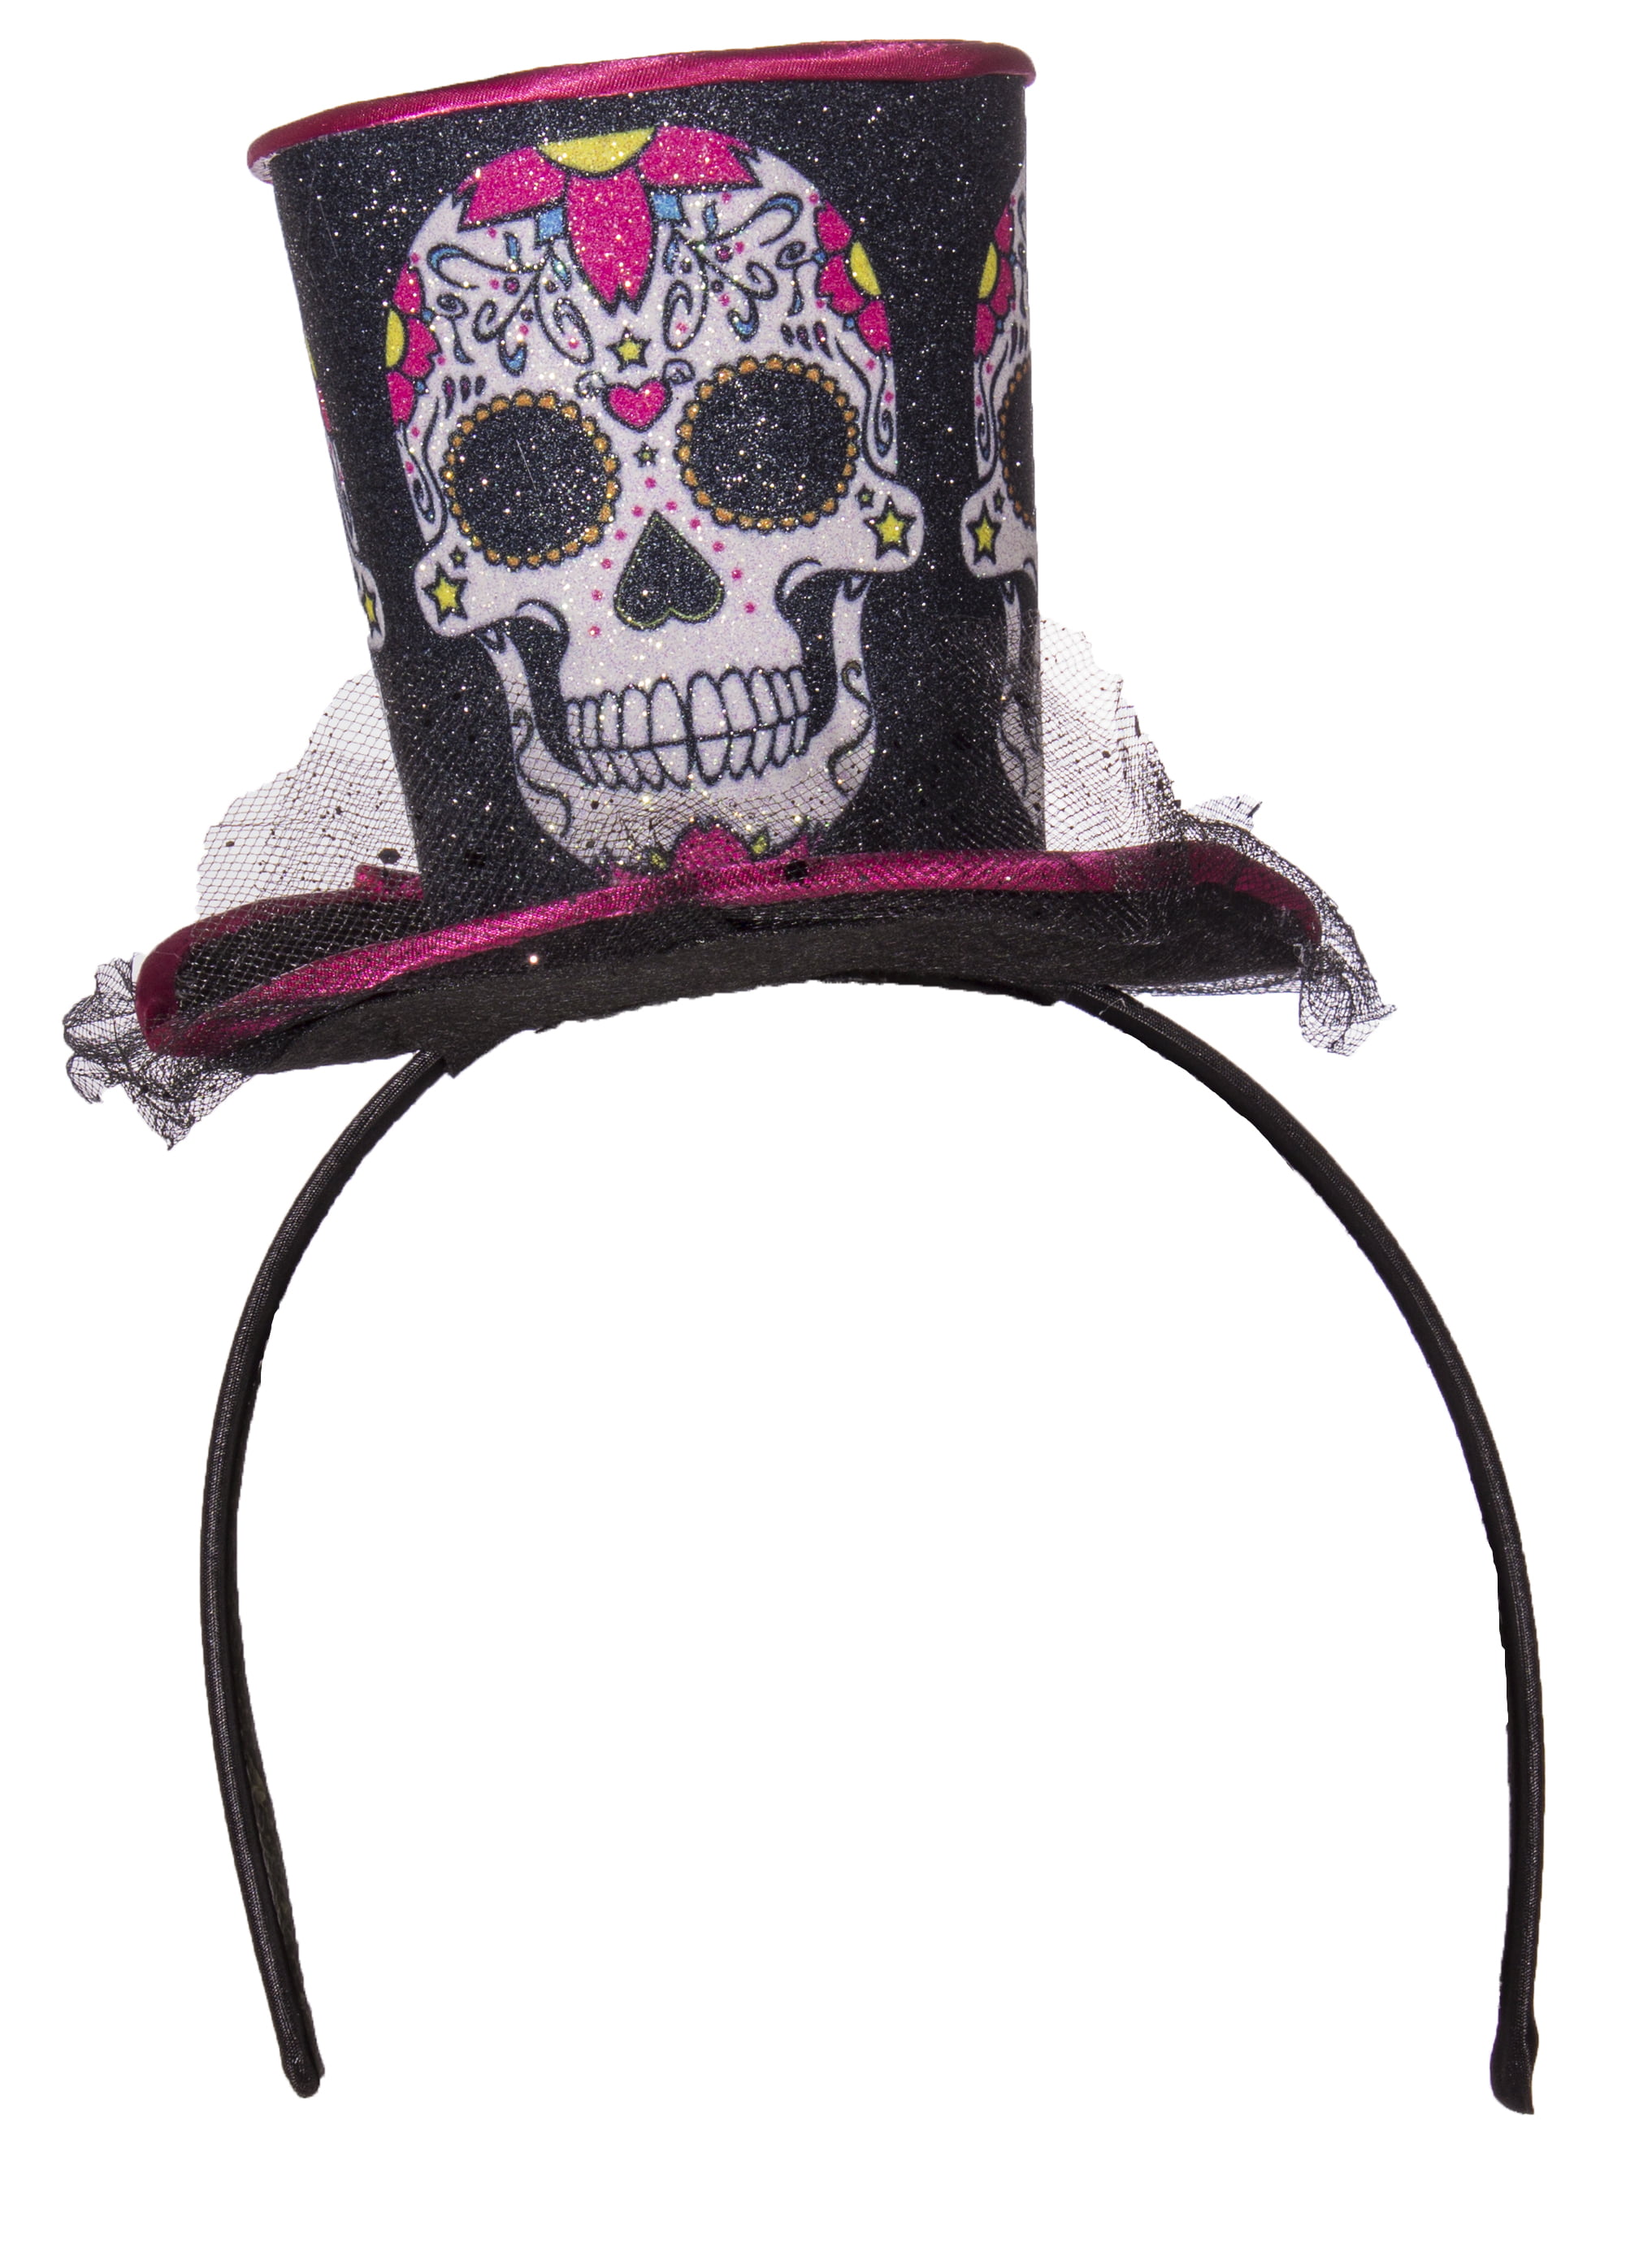 Day Of The Dead Top Hat Headband w/ Sparkles and Lace Costume Accessory 